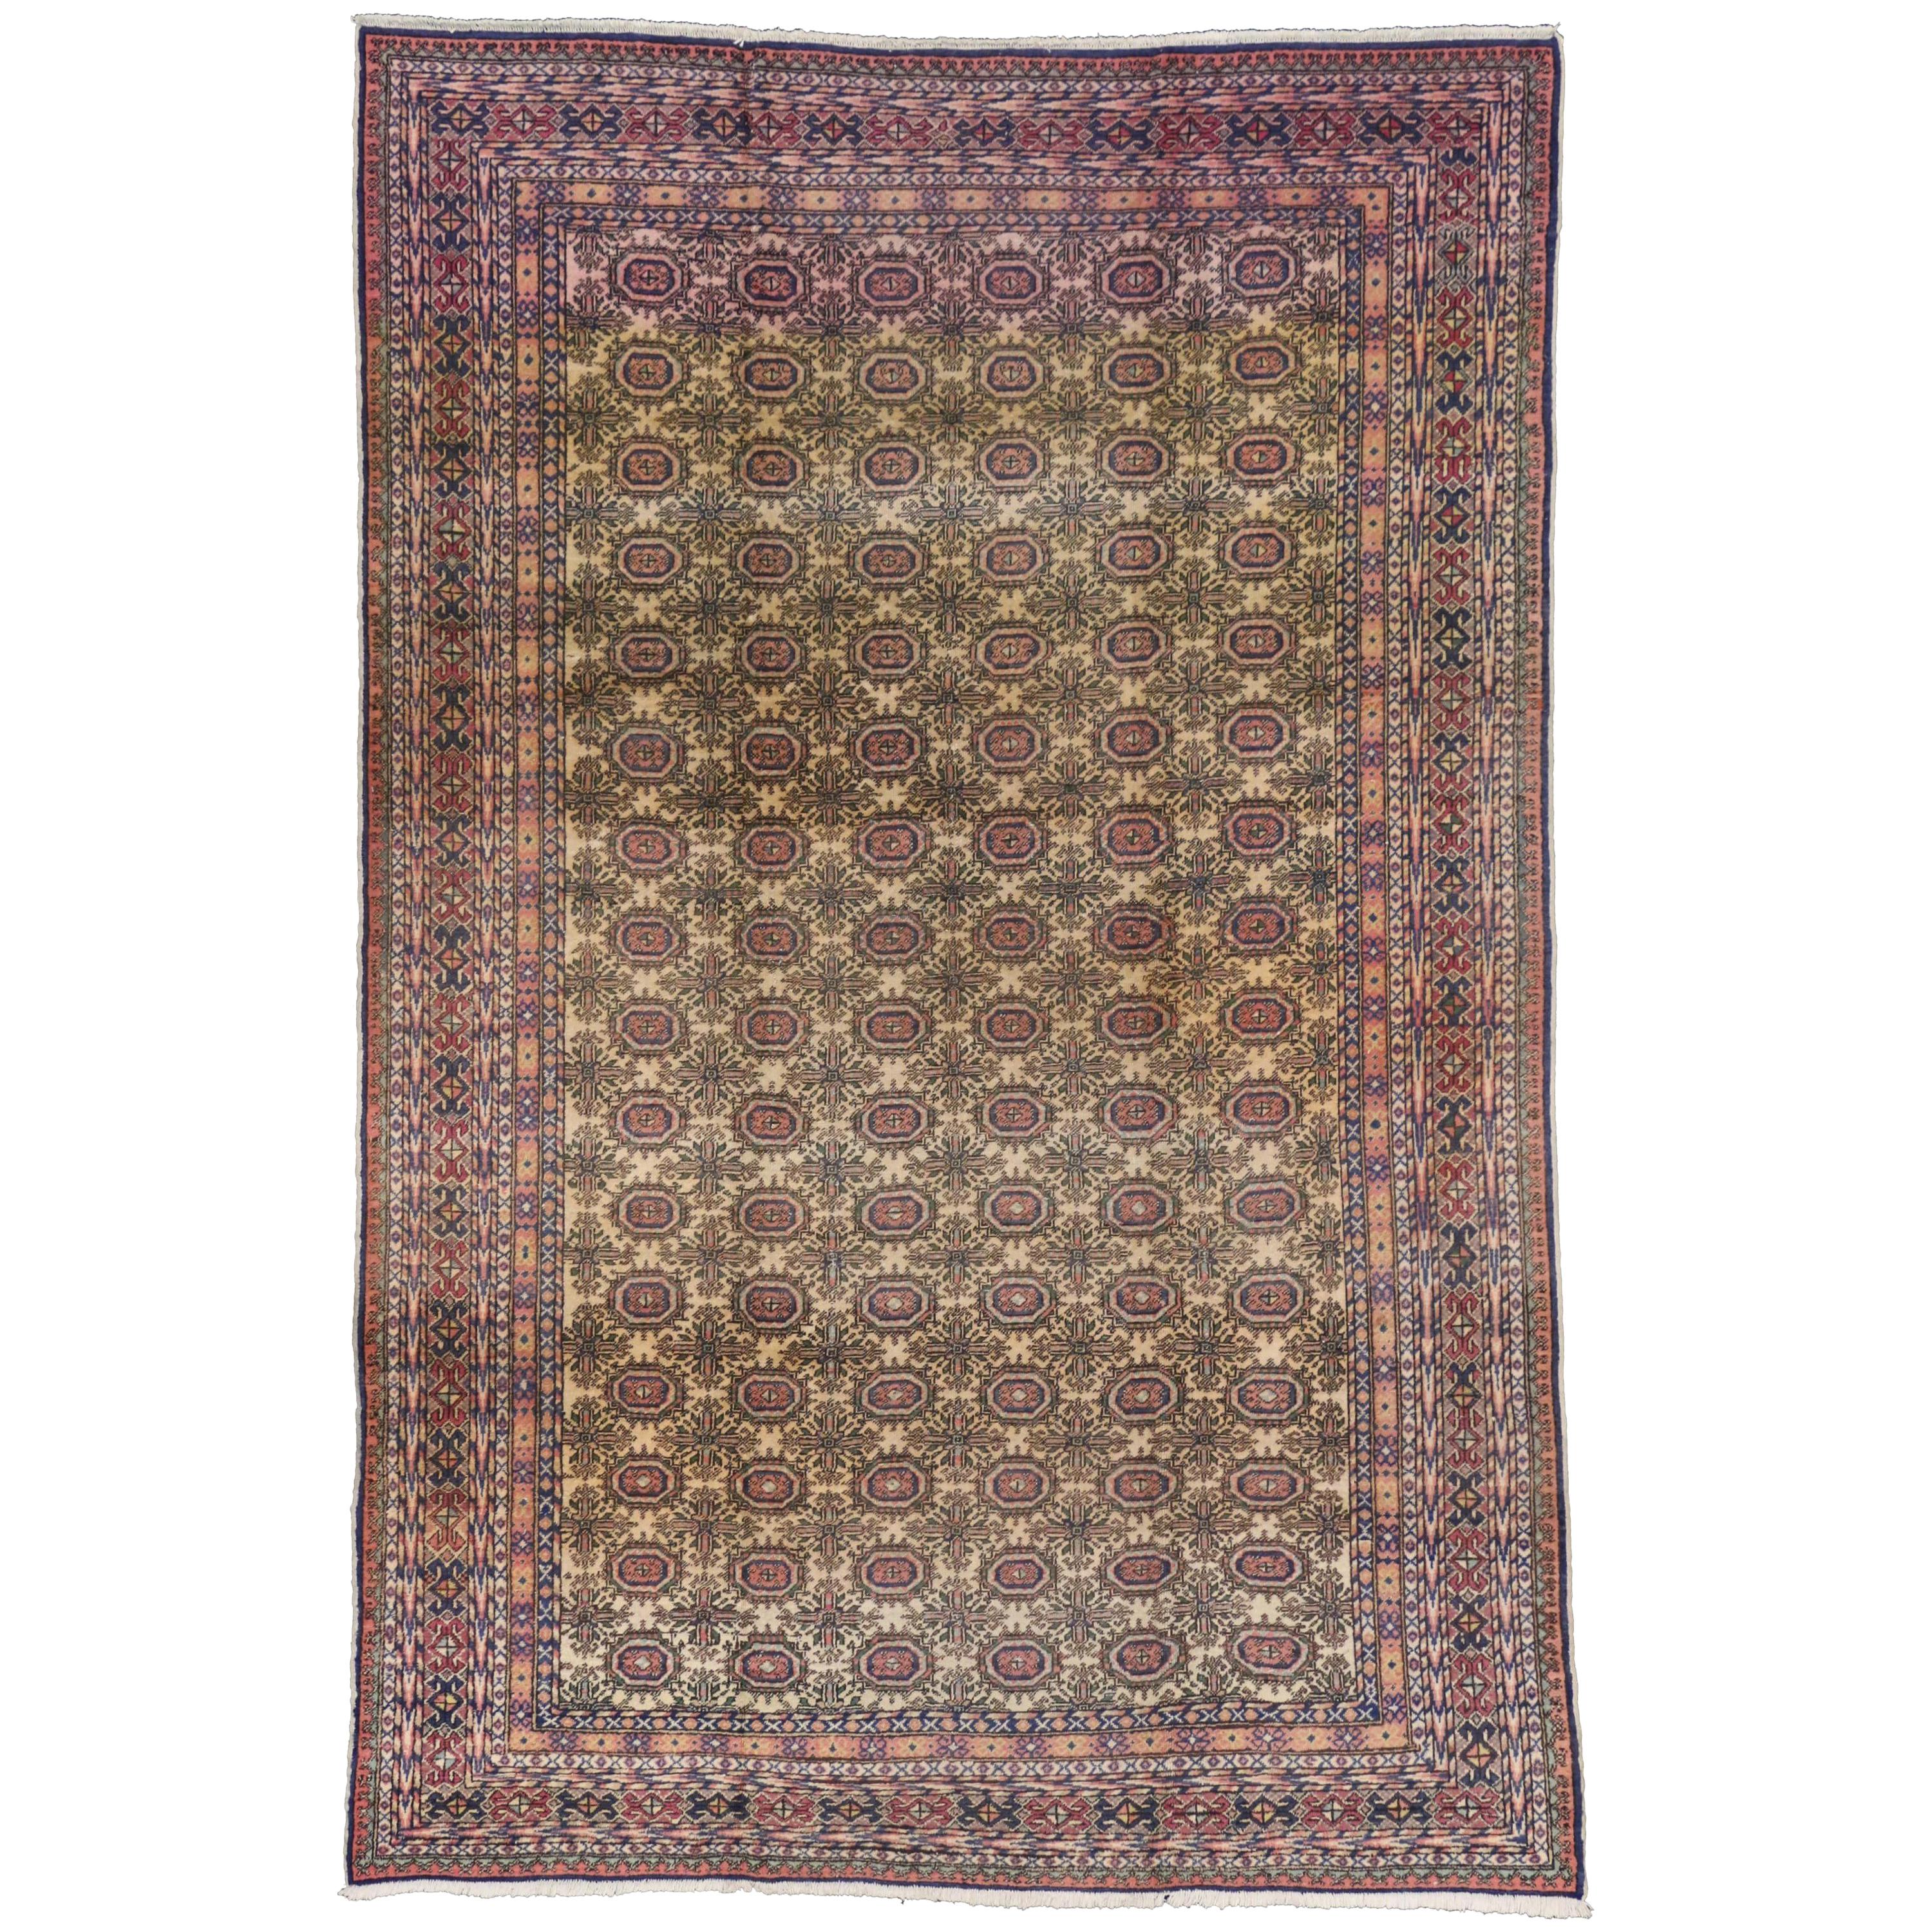 Vintage Turkish Sivas Rug with Bohemian Style, Pink and Purple Hues